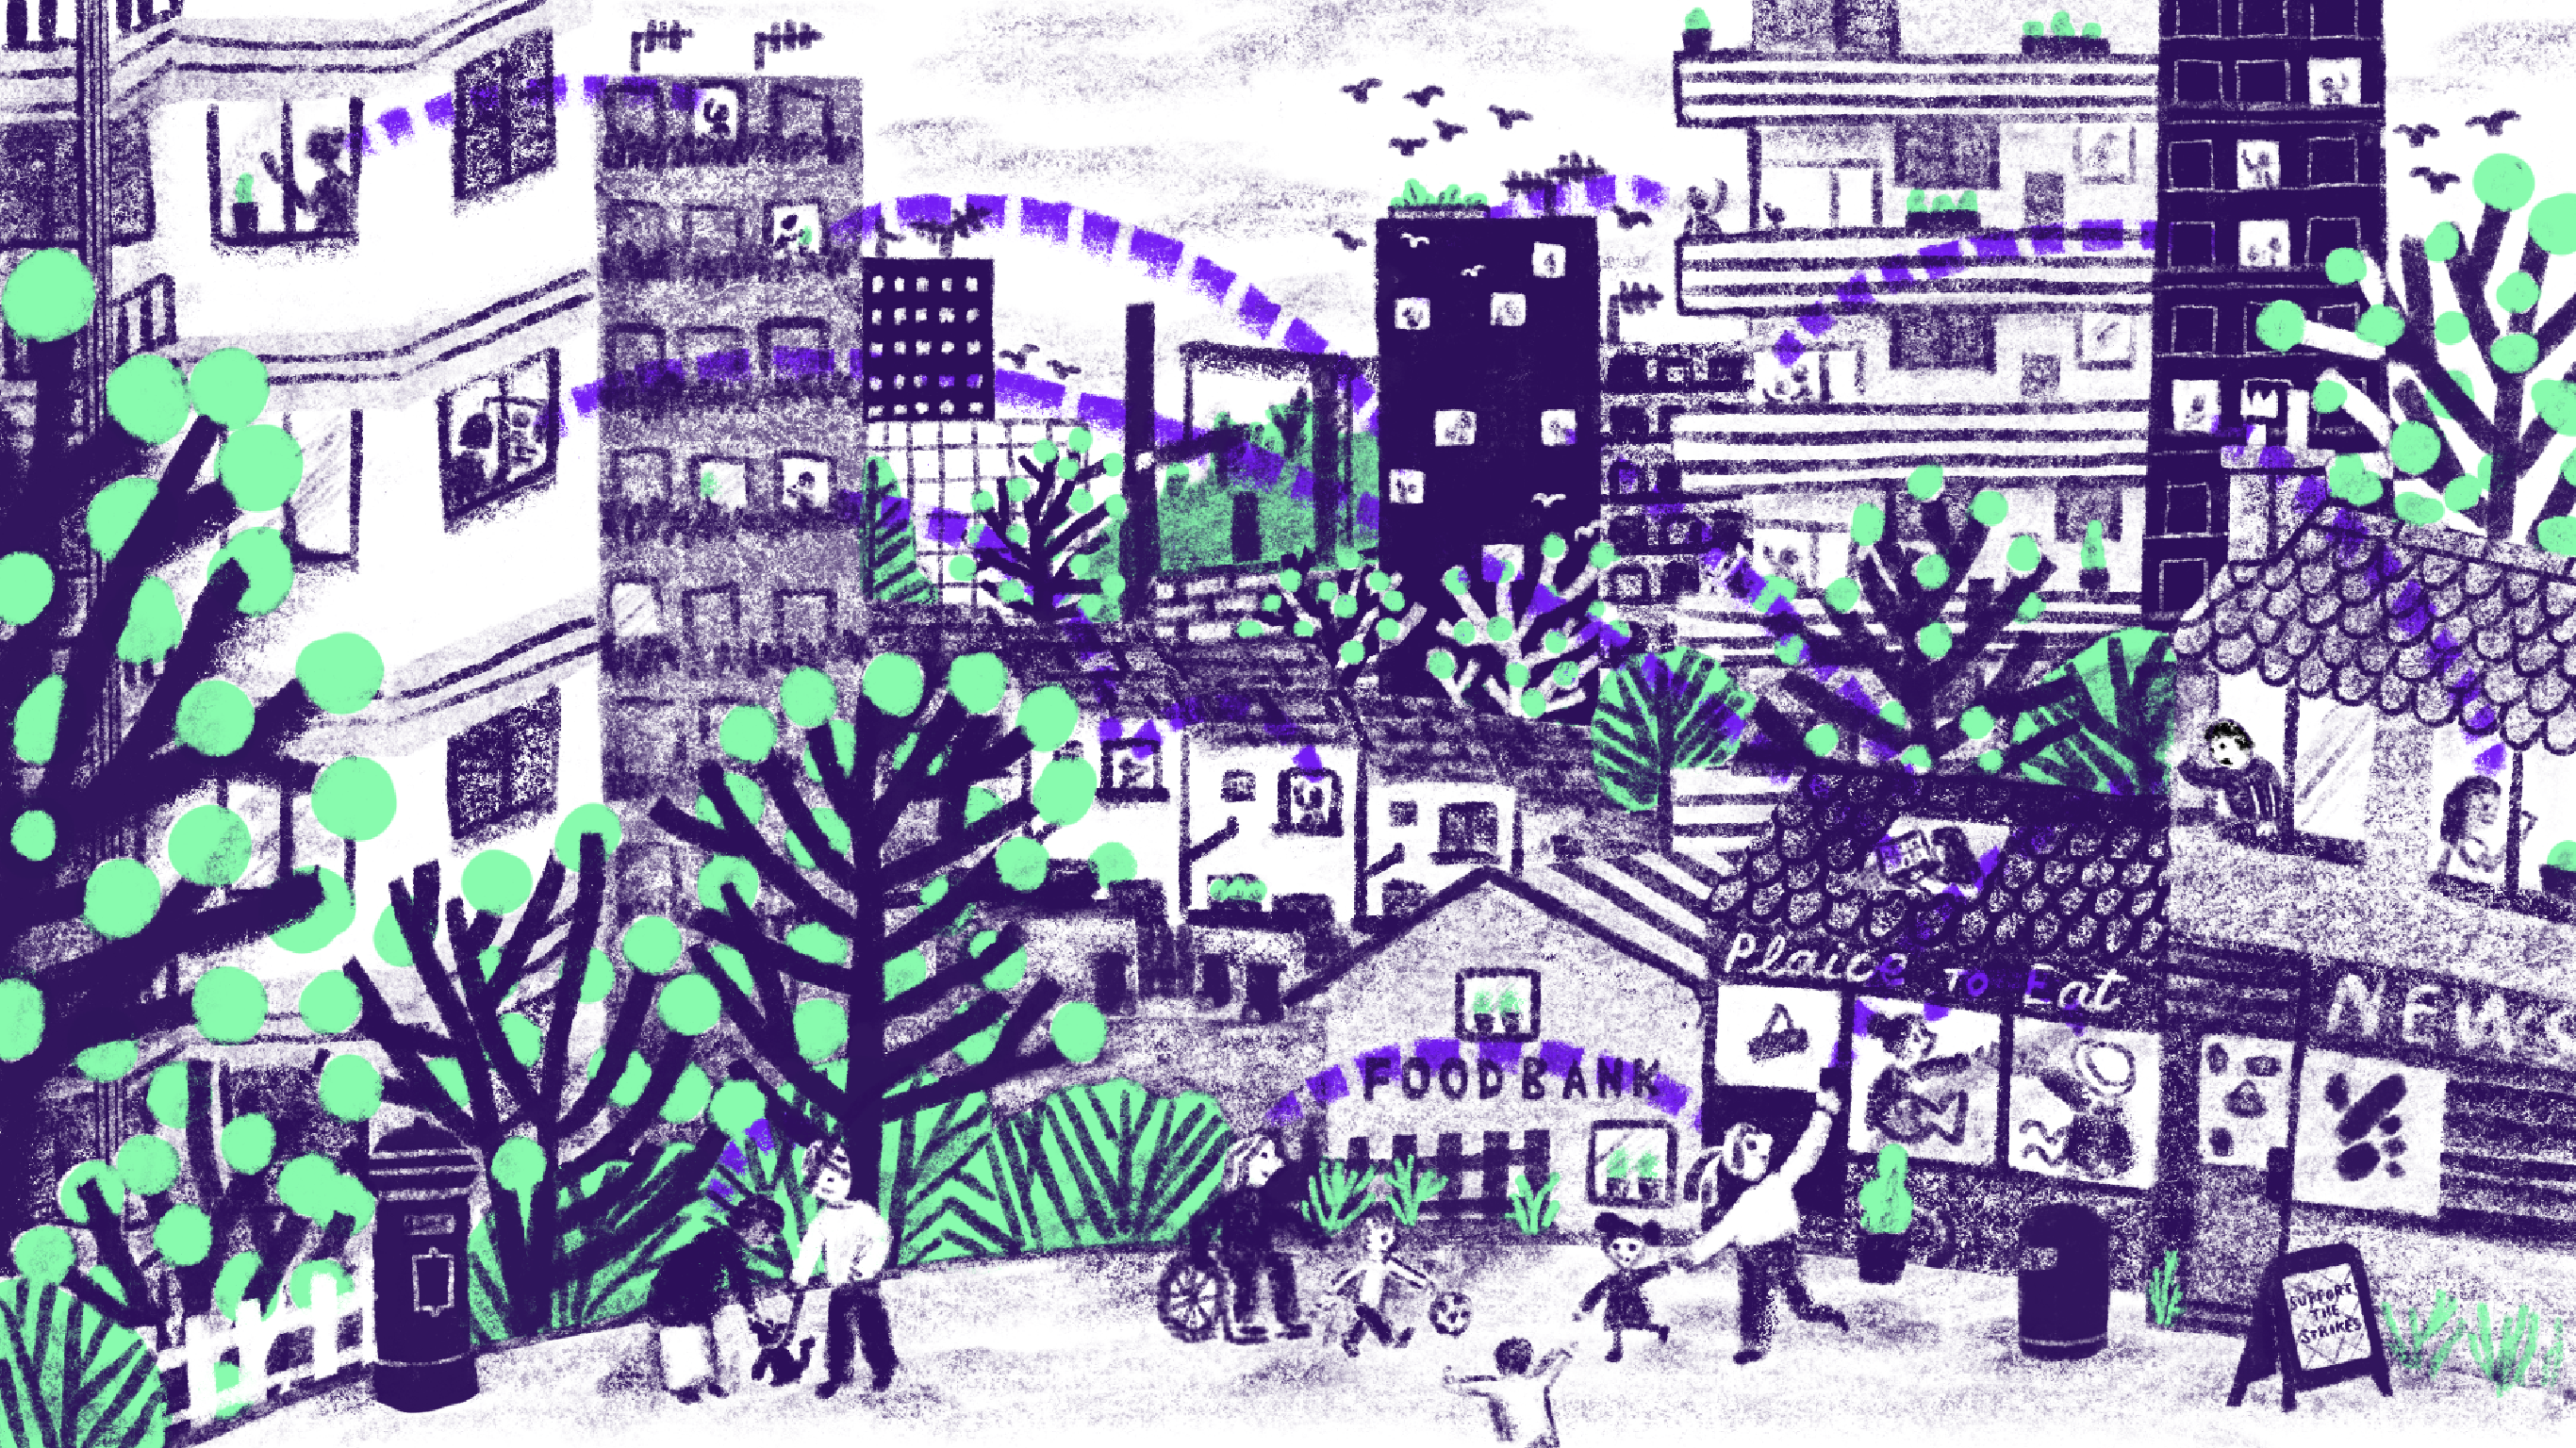 Illustrated Spring scene of town